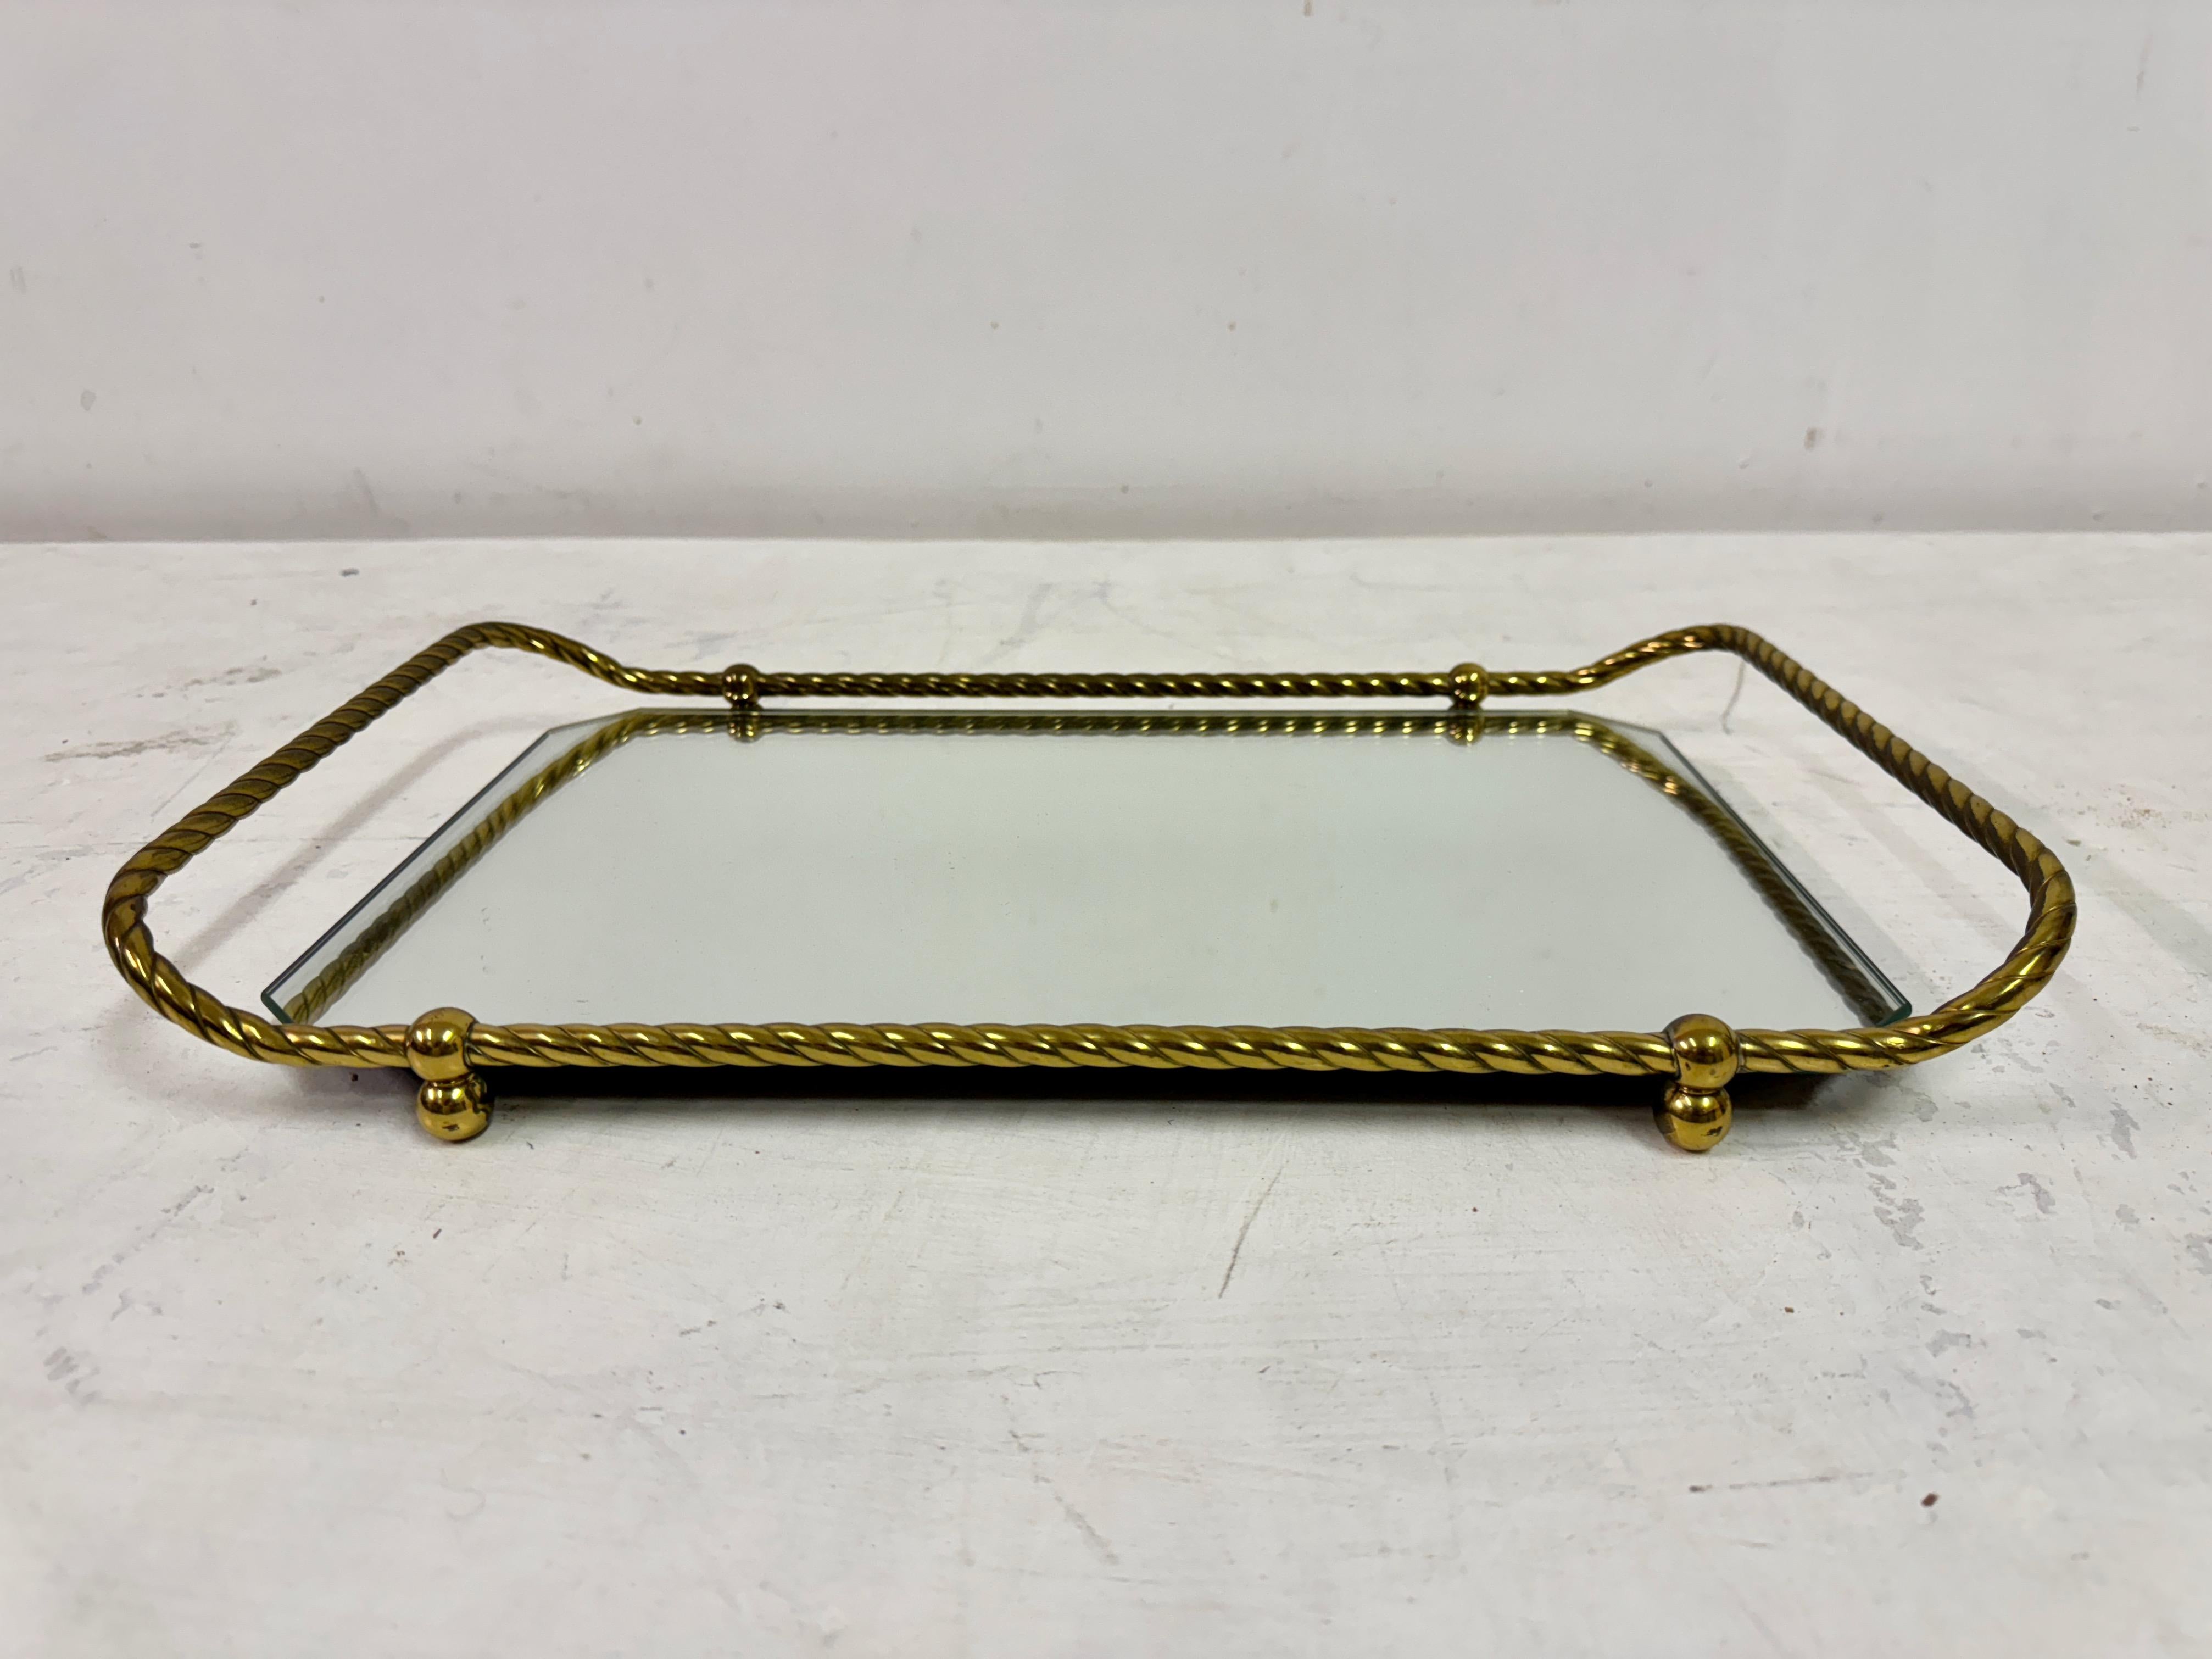 Vintage Italian Brass Tray With Mirrored Glass In Good Condition For Sale In London, London